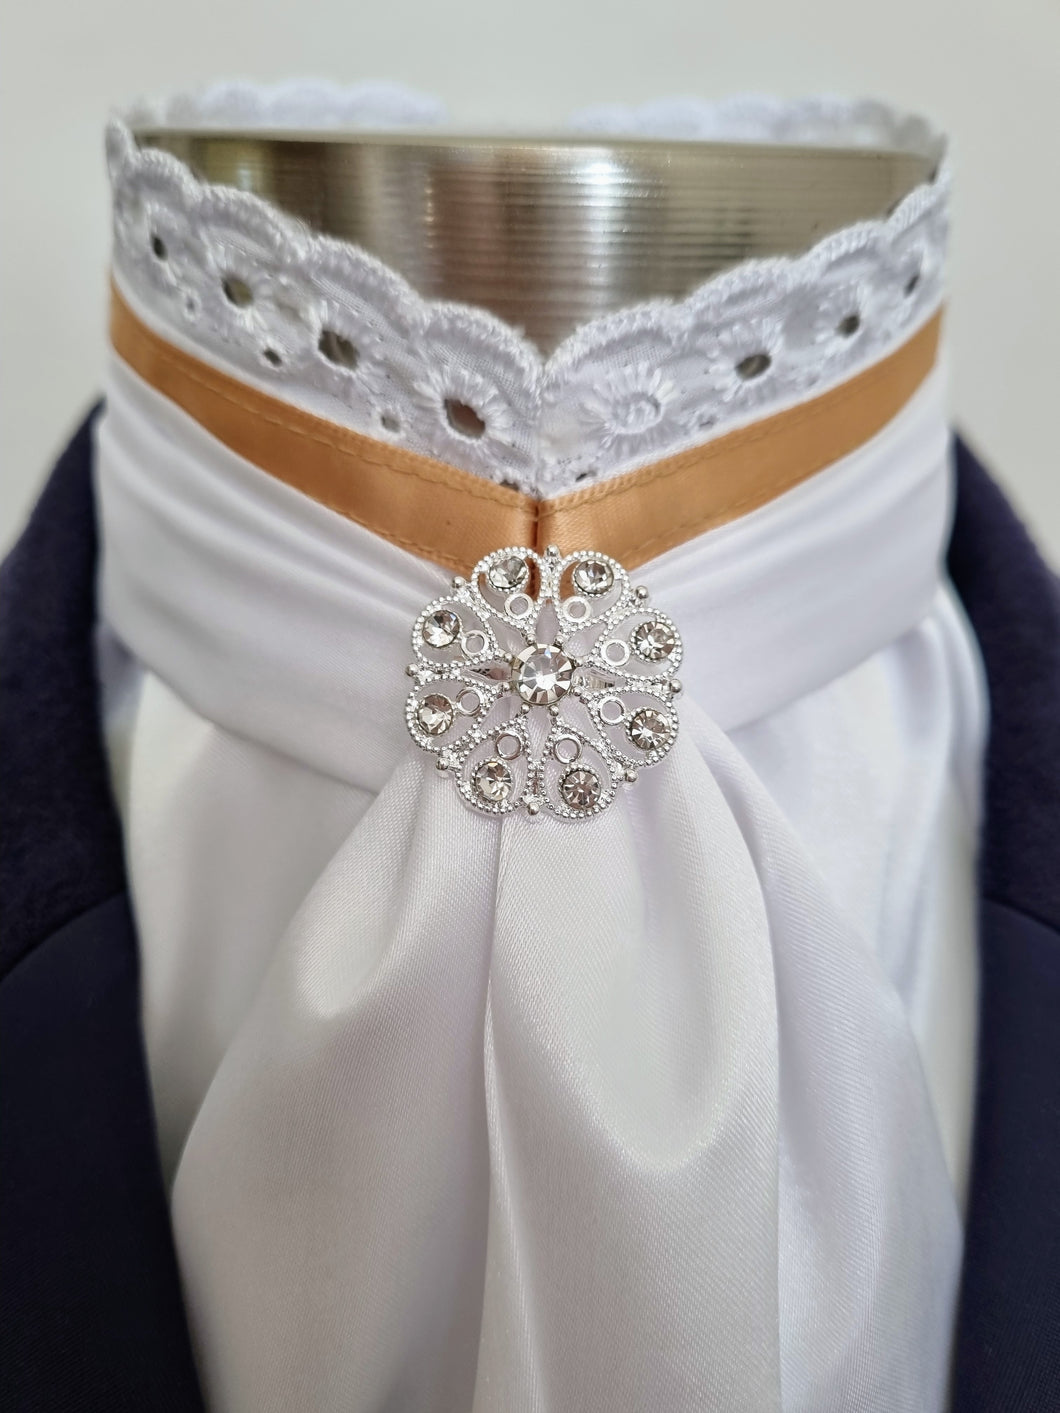 ERA EURO BELLE Stock Tie - White lustre satin with Gold trim, lace frill and brooch